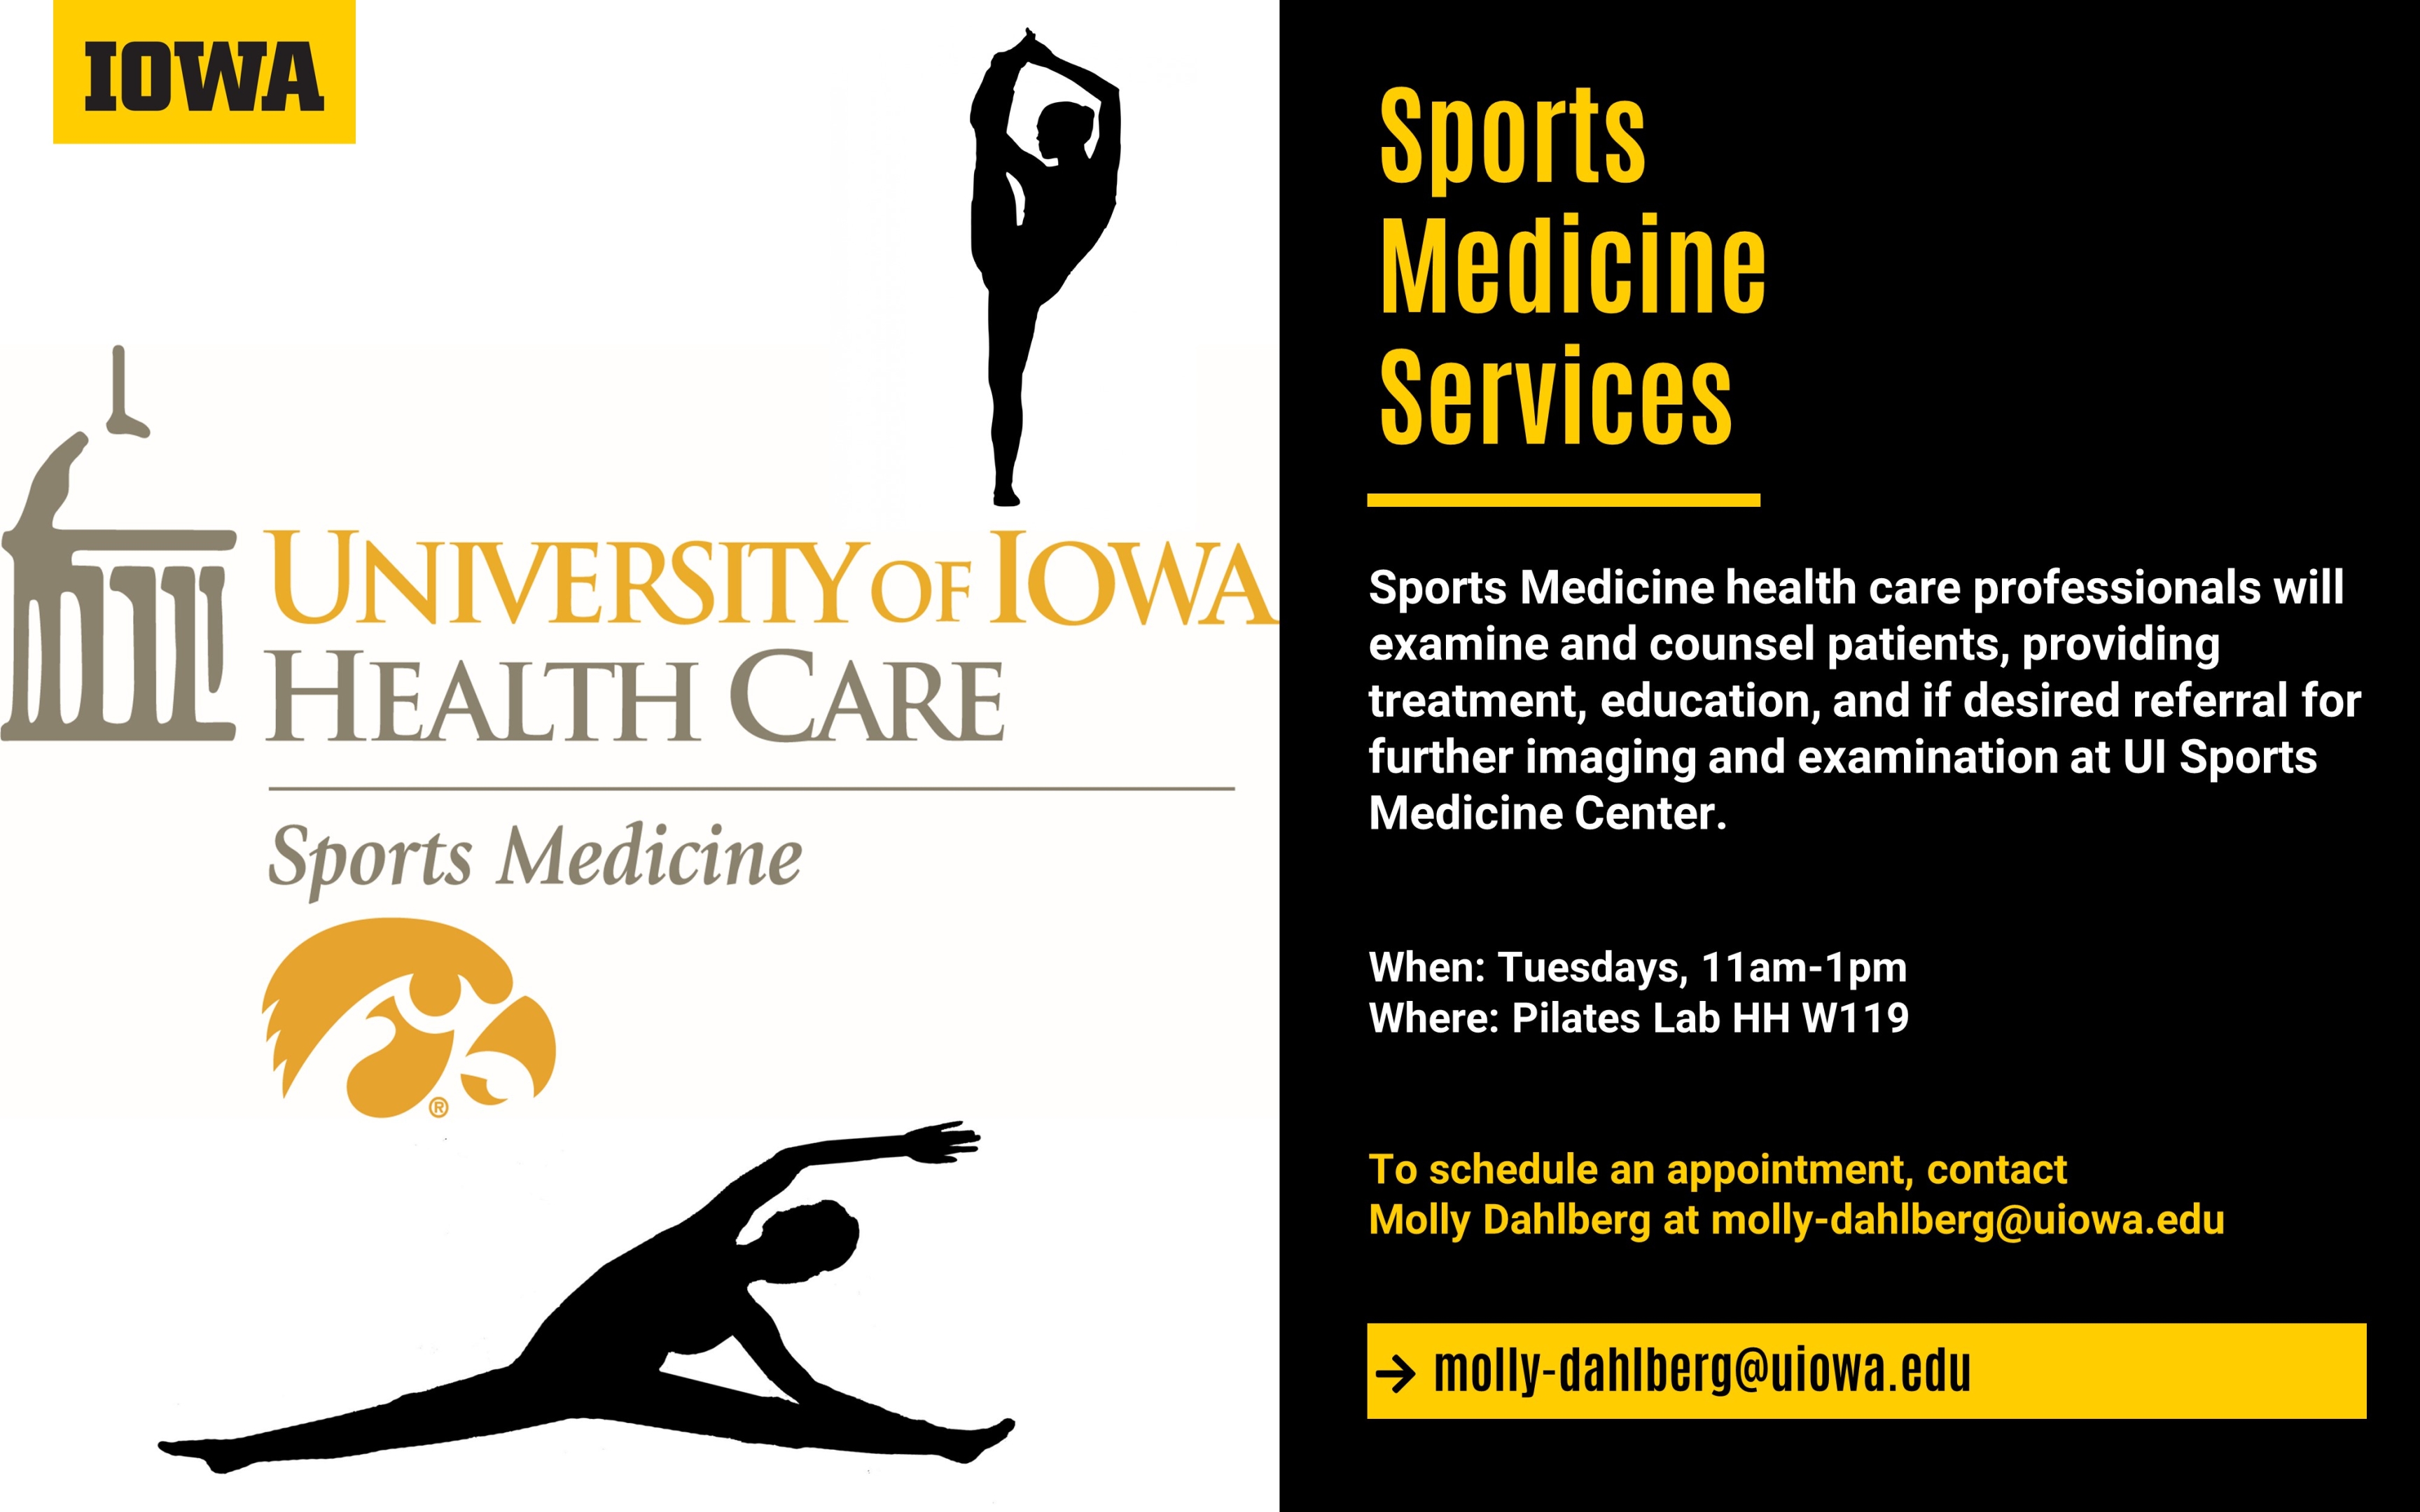 Sports Medicine Appointments available Tuesdays 11-1, HH W119, molly-dahlberg@uiowa.edu